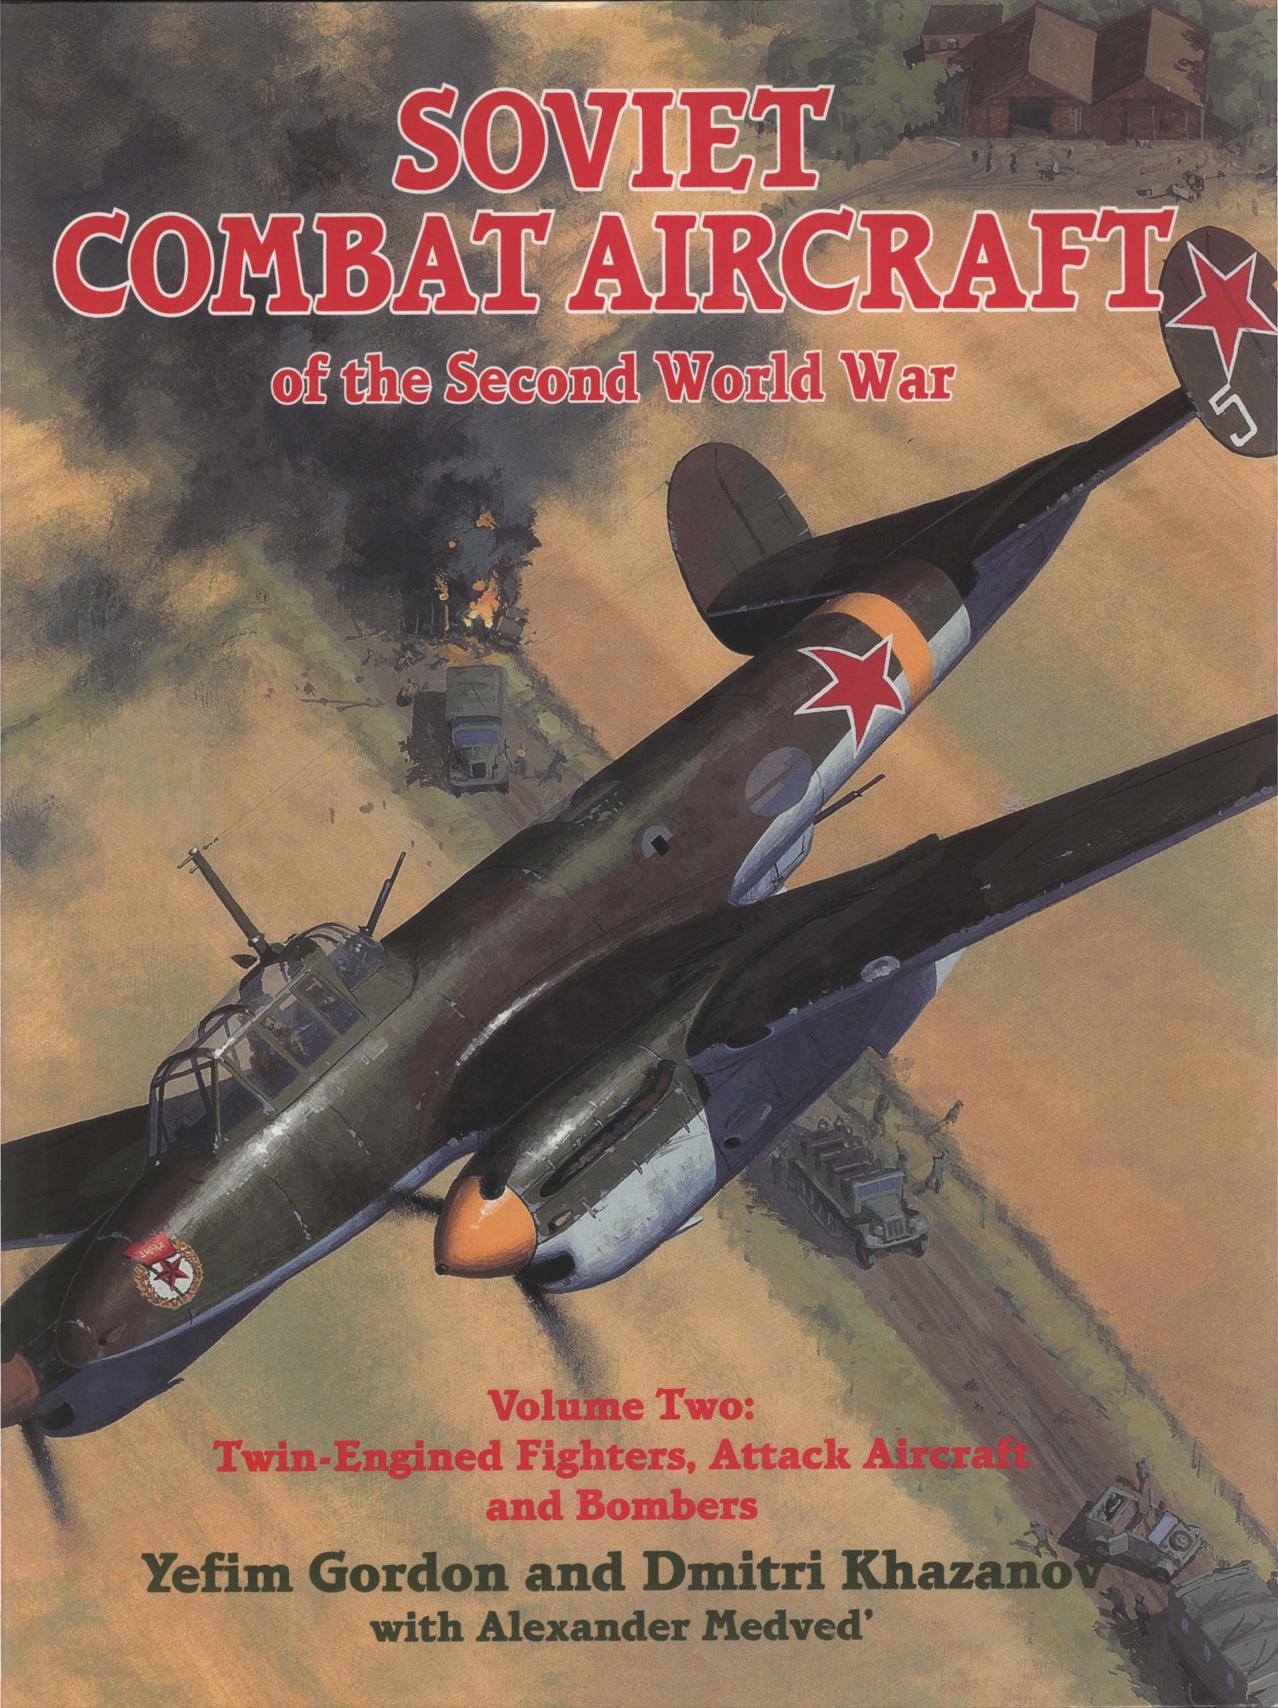 Soviet Combat Aircraft of the Second World War Volume 2 by Unknown